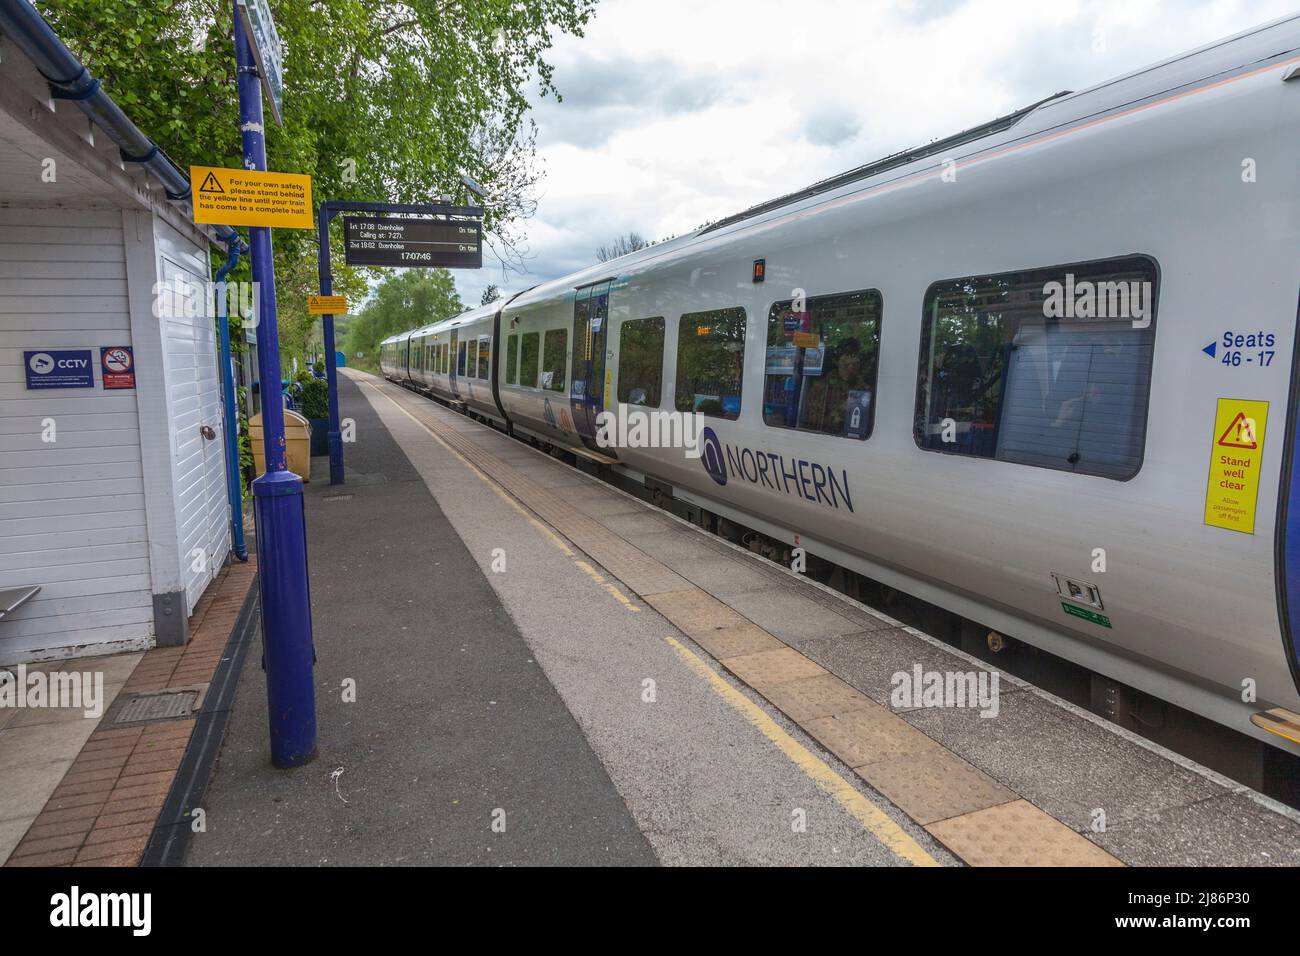 A Northern train at the platform at Windermere Railway Station in the Lake District,England,UK Stock Photo